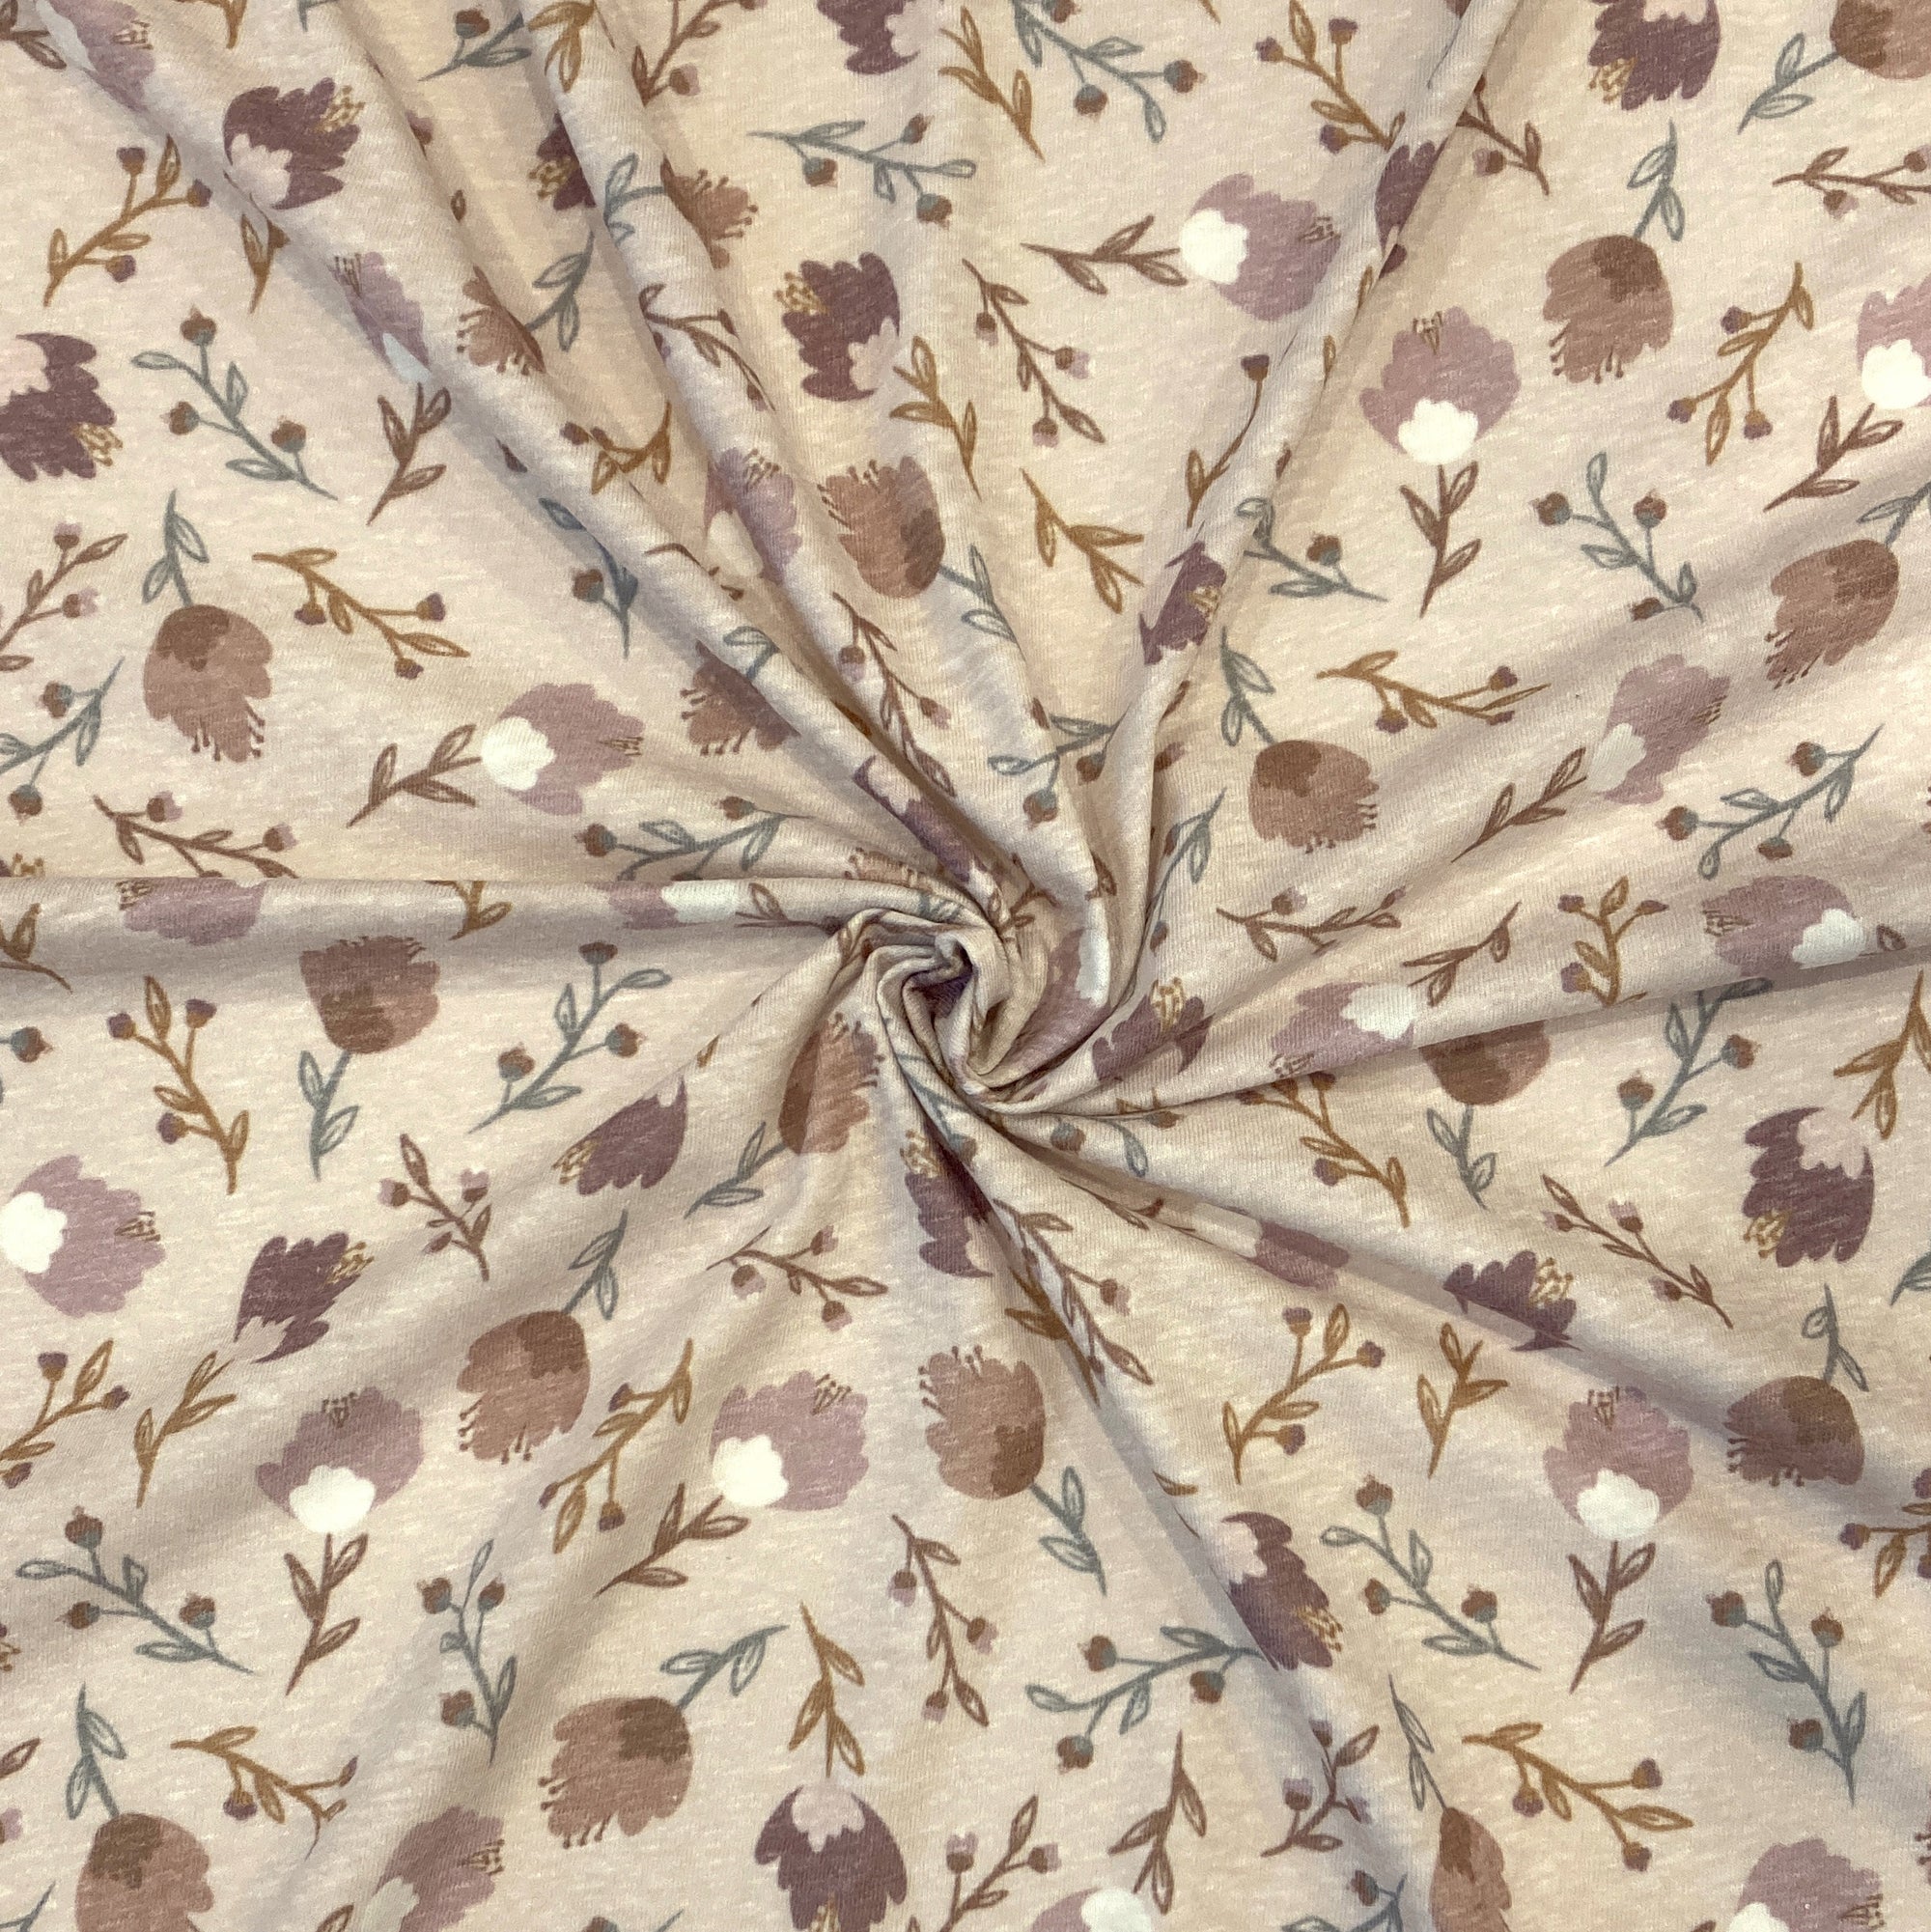 Tonal Tan Olive and Mauve Floral Tri-Blend Jersey Knit Fabric, Wander by Kelsey Shaw for CLUB Fabrics Fabric, Raspberry Creek Fabrics